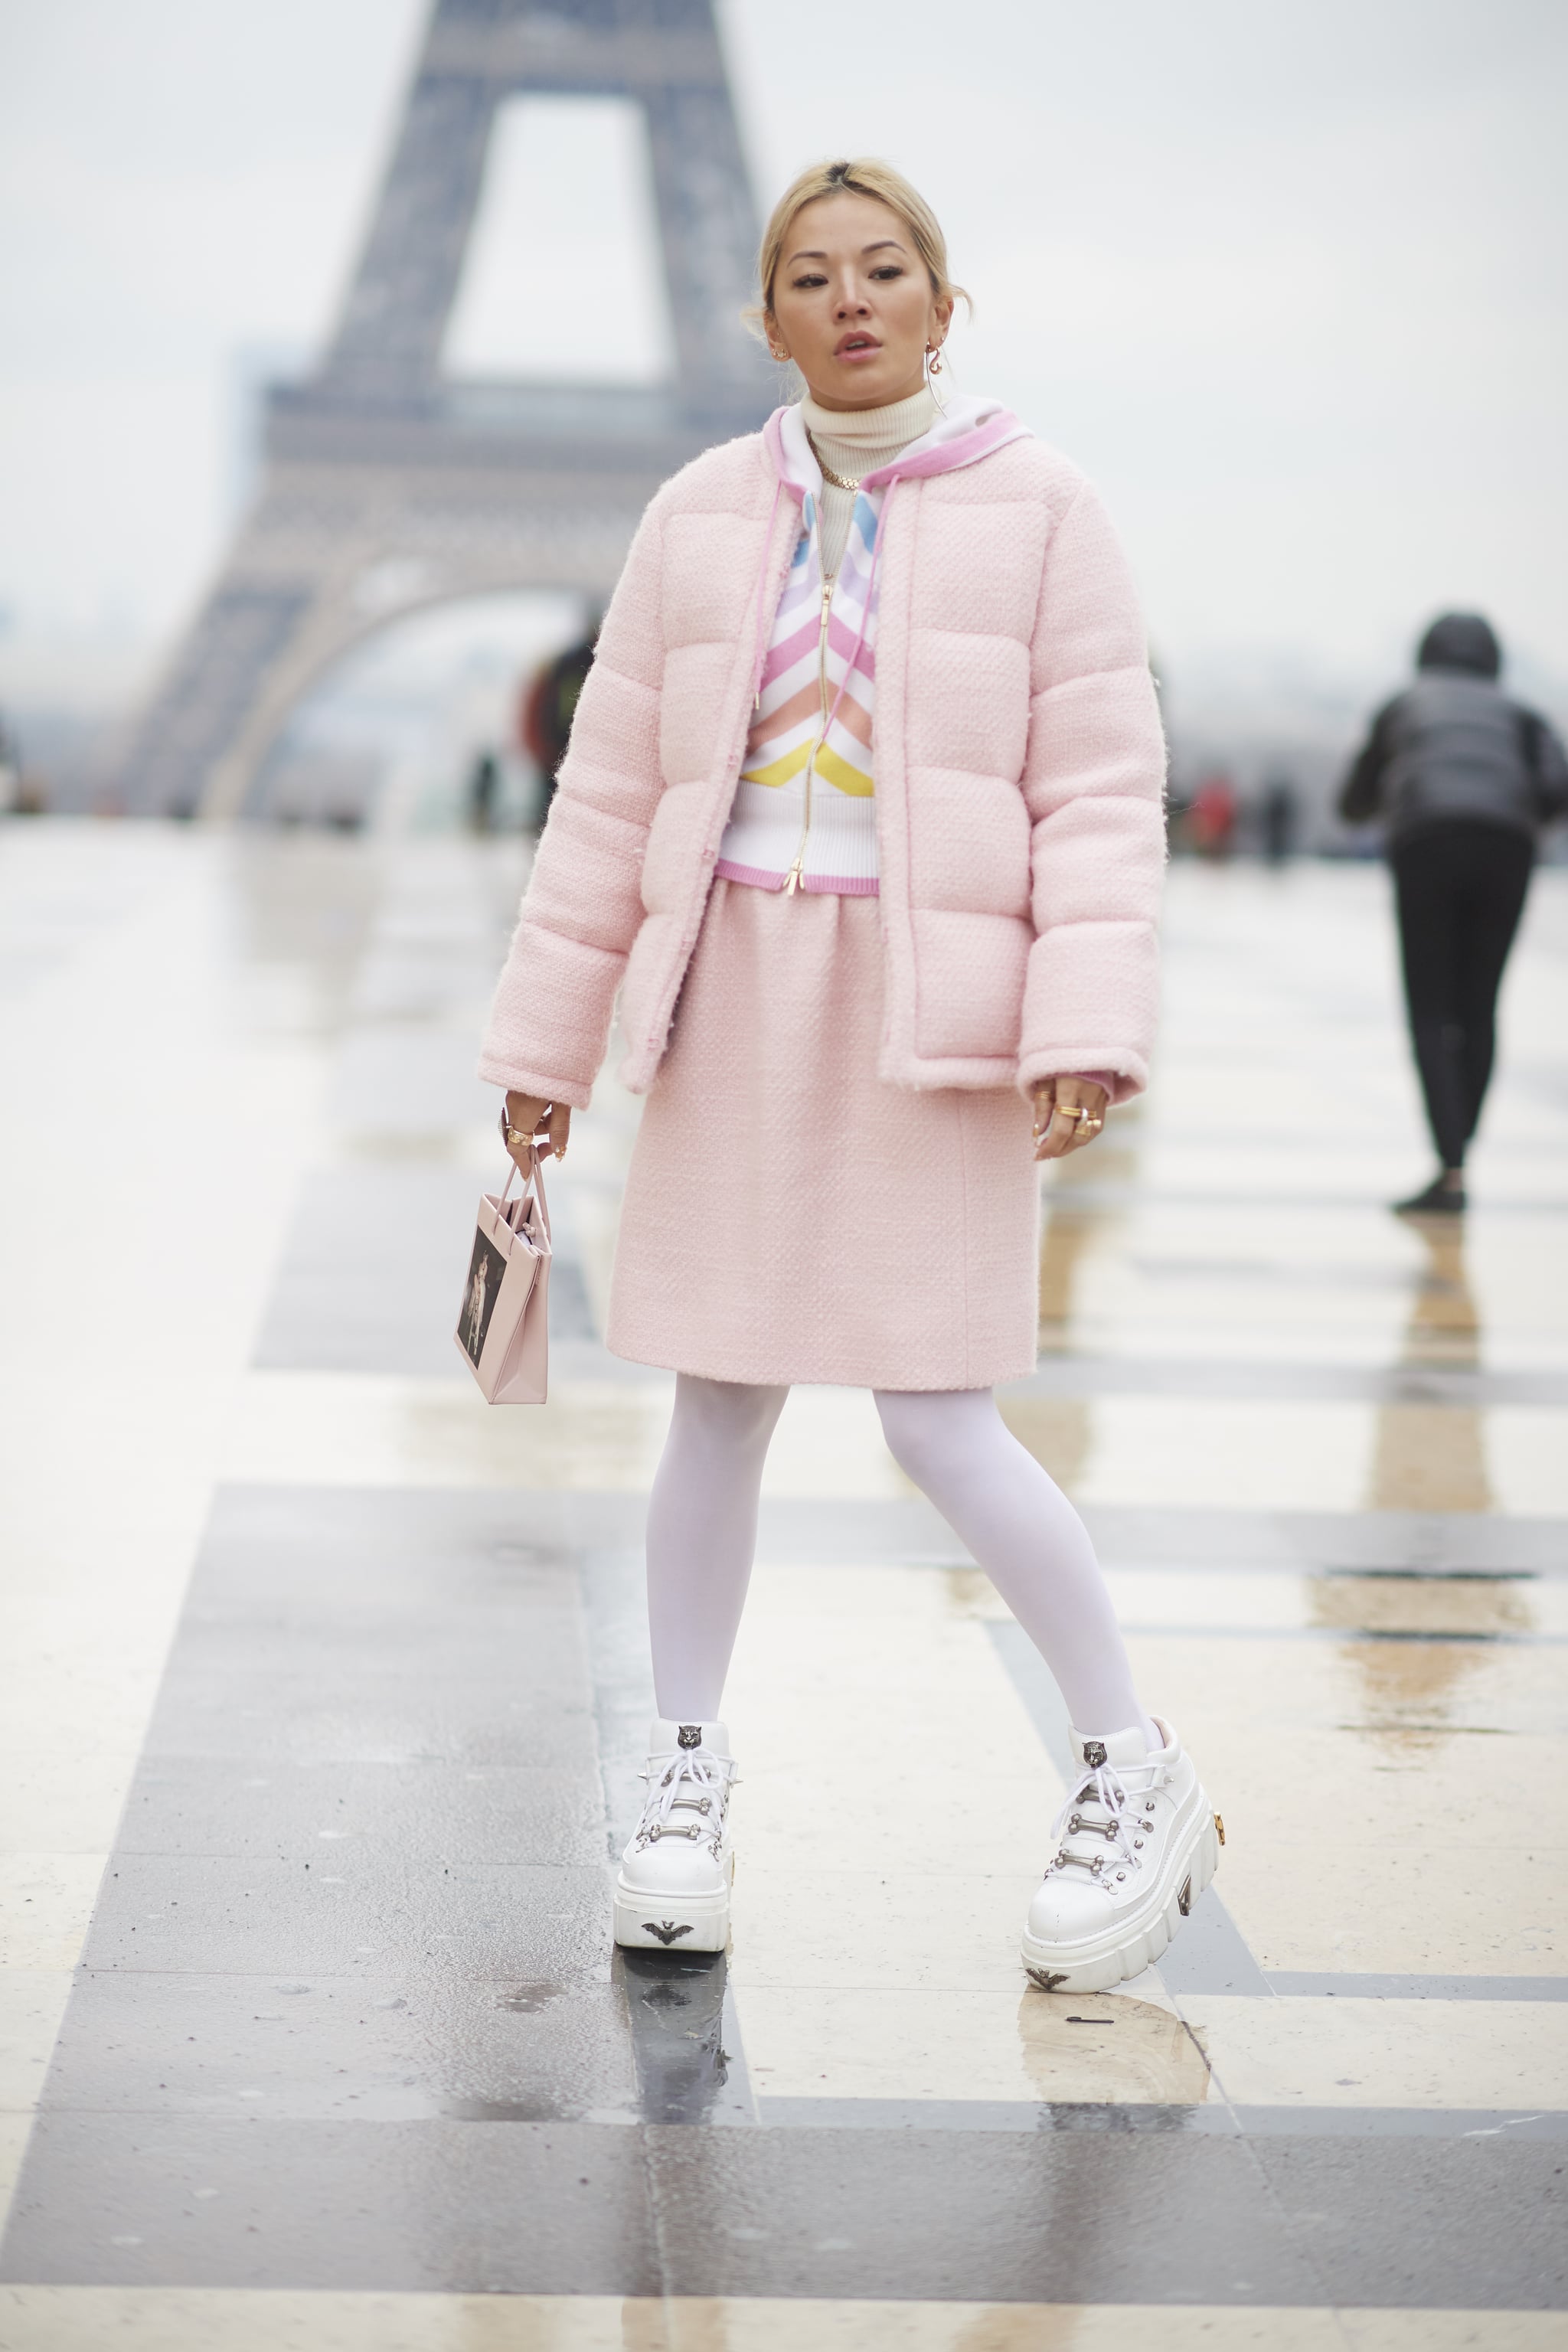 White With Pastels For Wintry Paris, These 33 Outfits Prove Tights Weather  Needn't Dampen Your Style